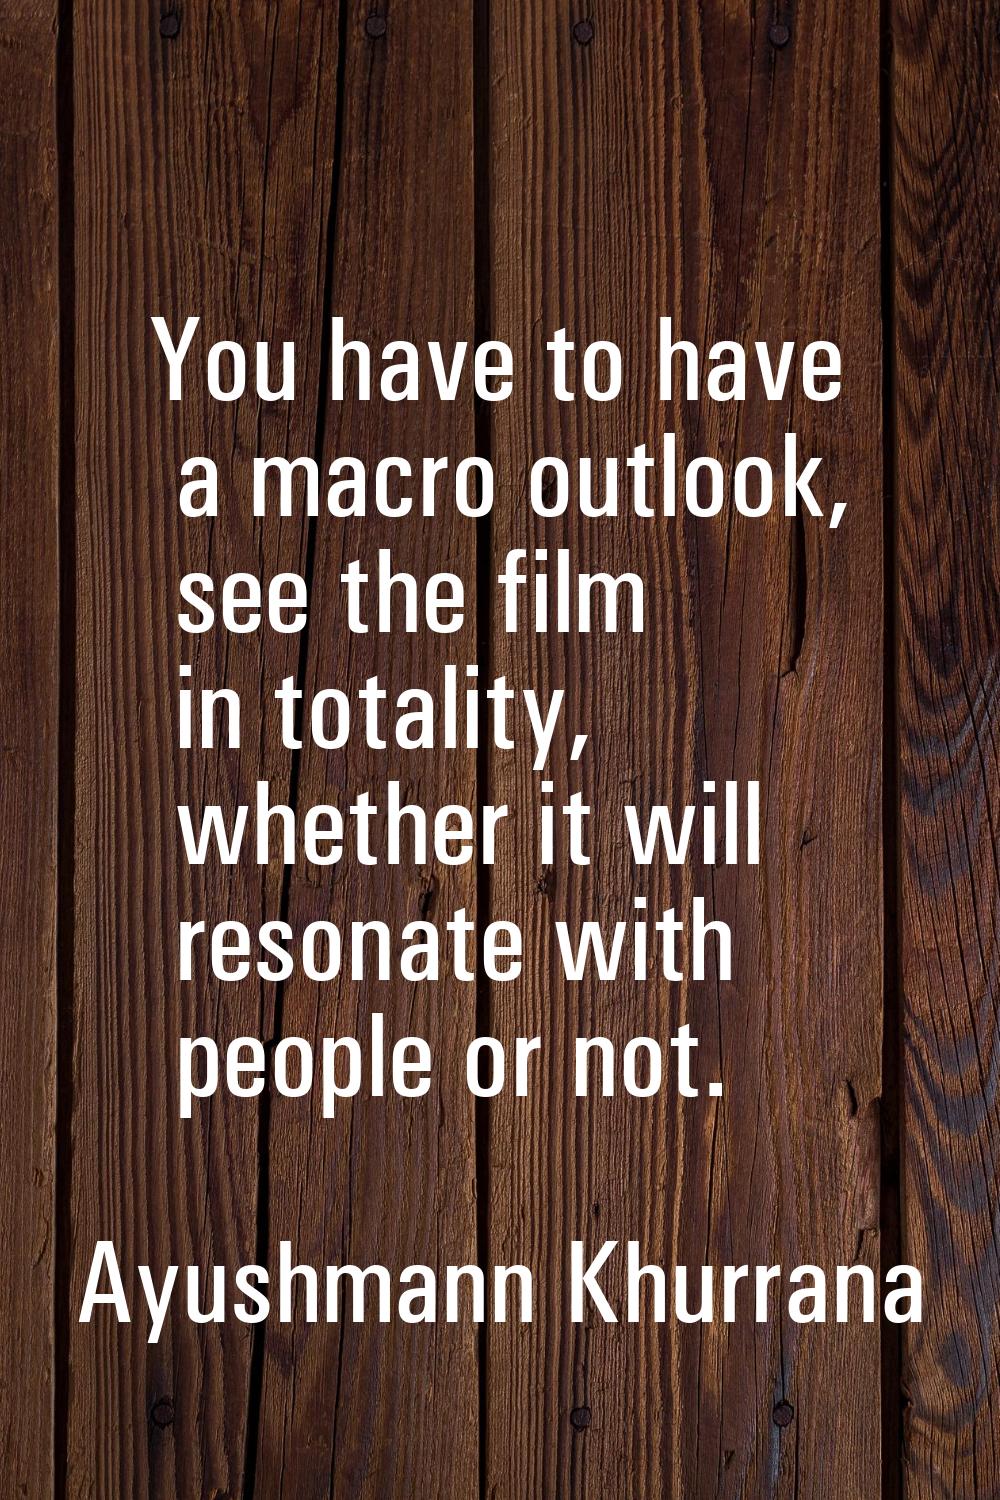 You have to have a macro outlook, see the film in totality, whether it will resonate with people or